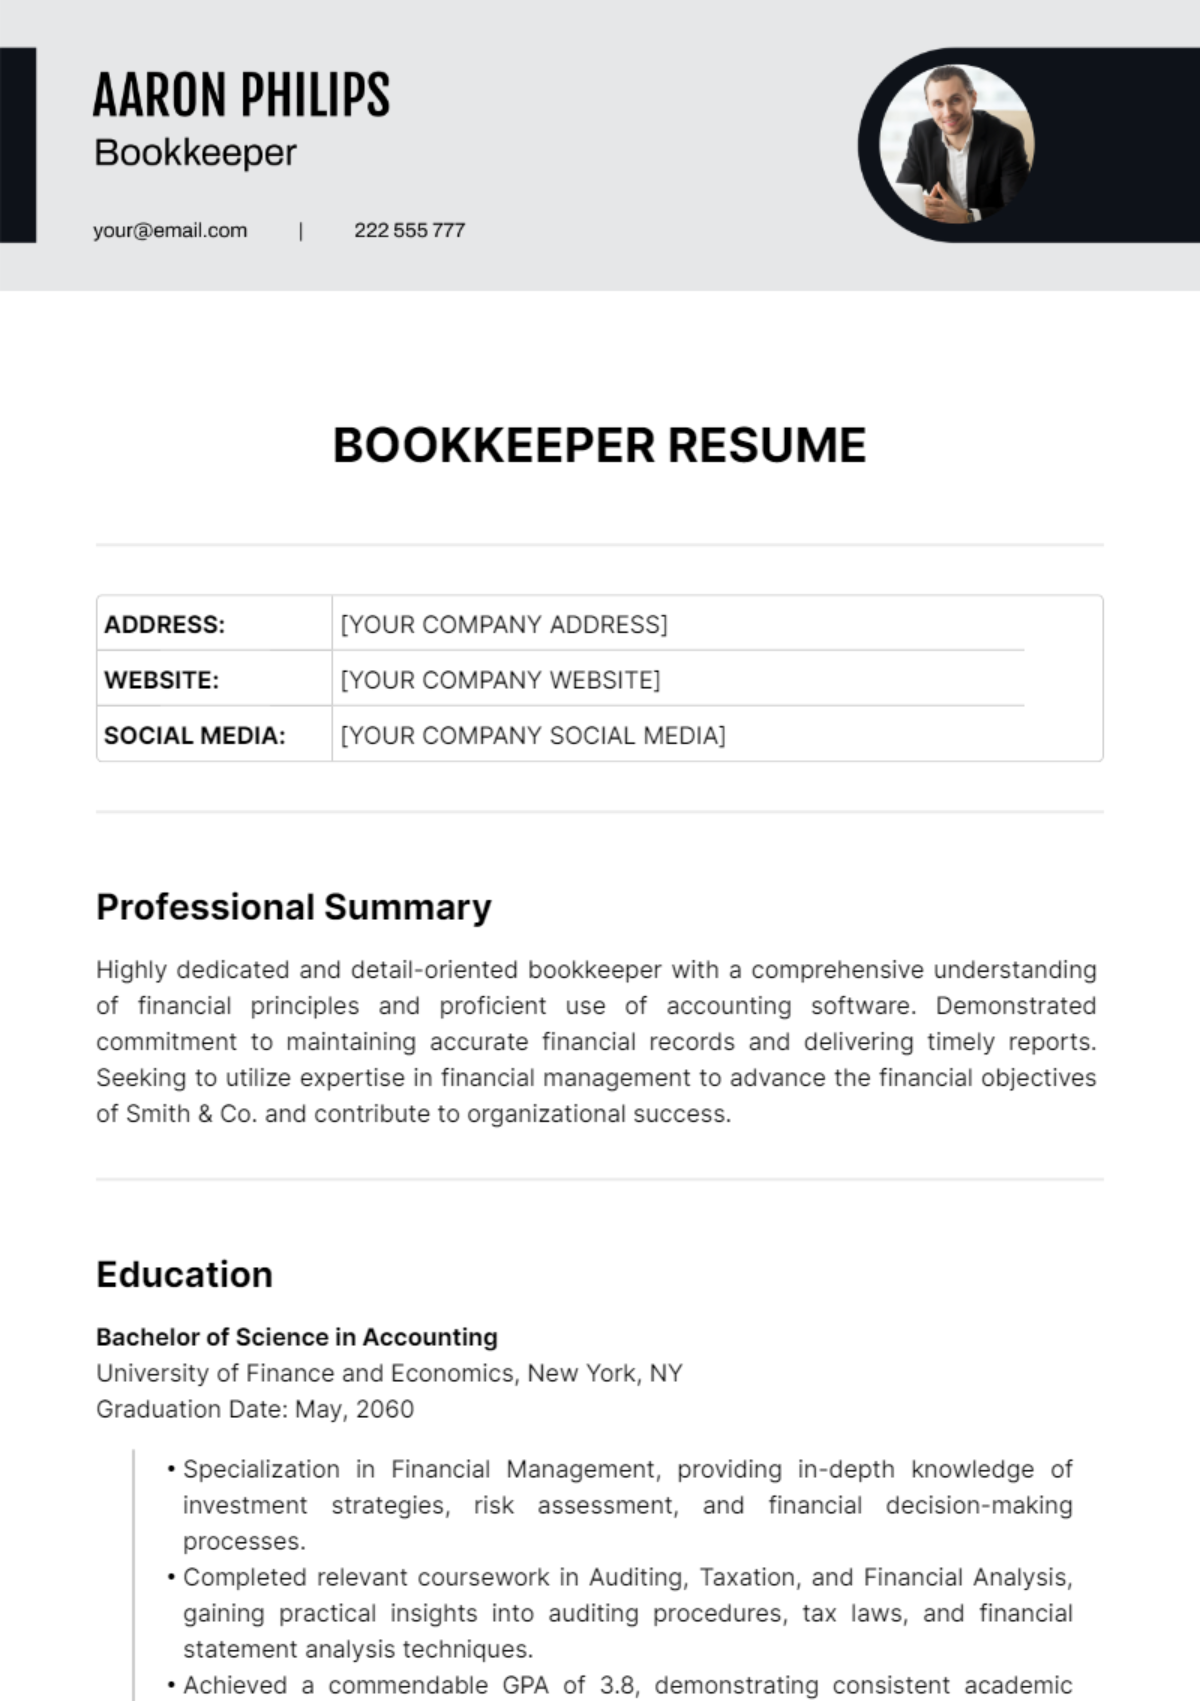 Bookkeeper Resume Template